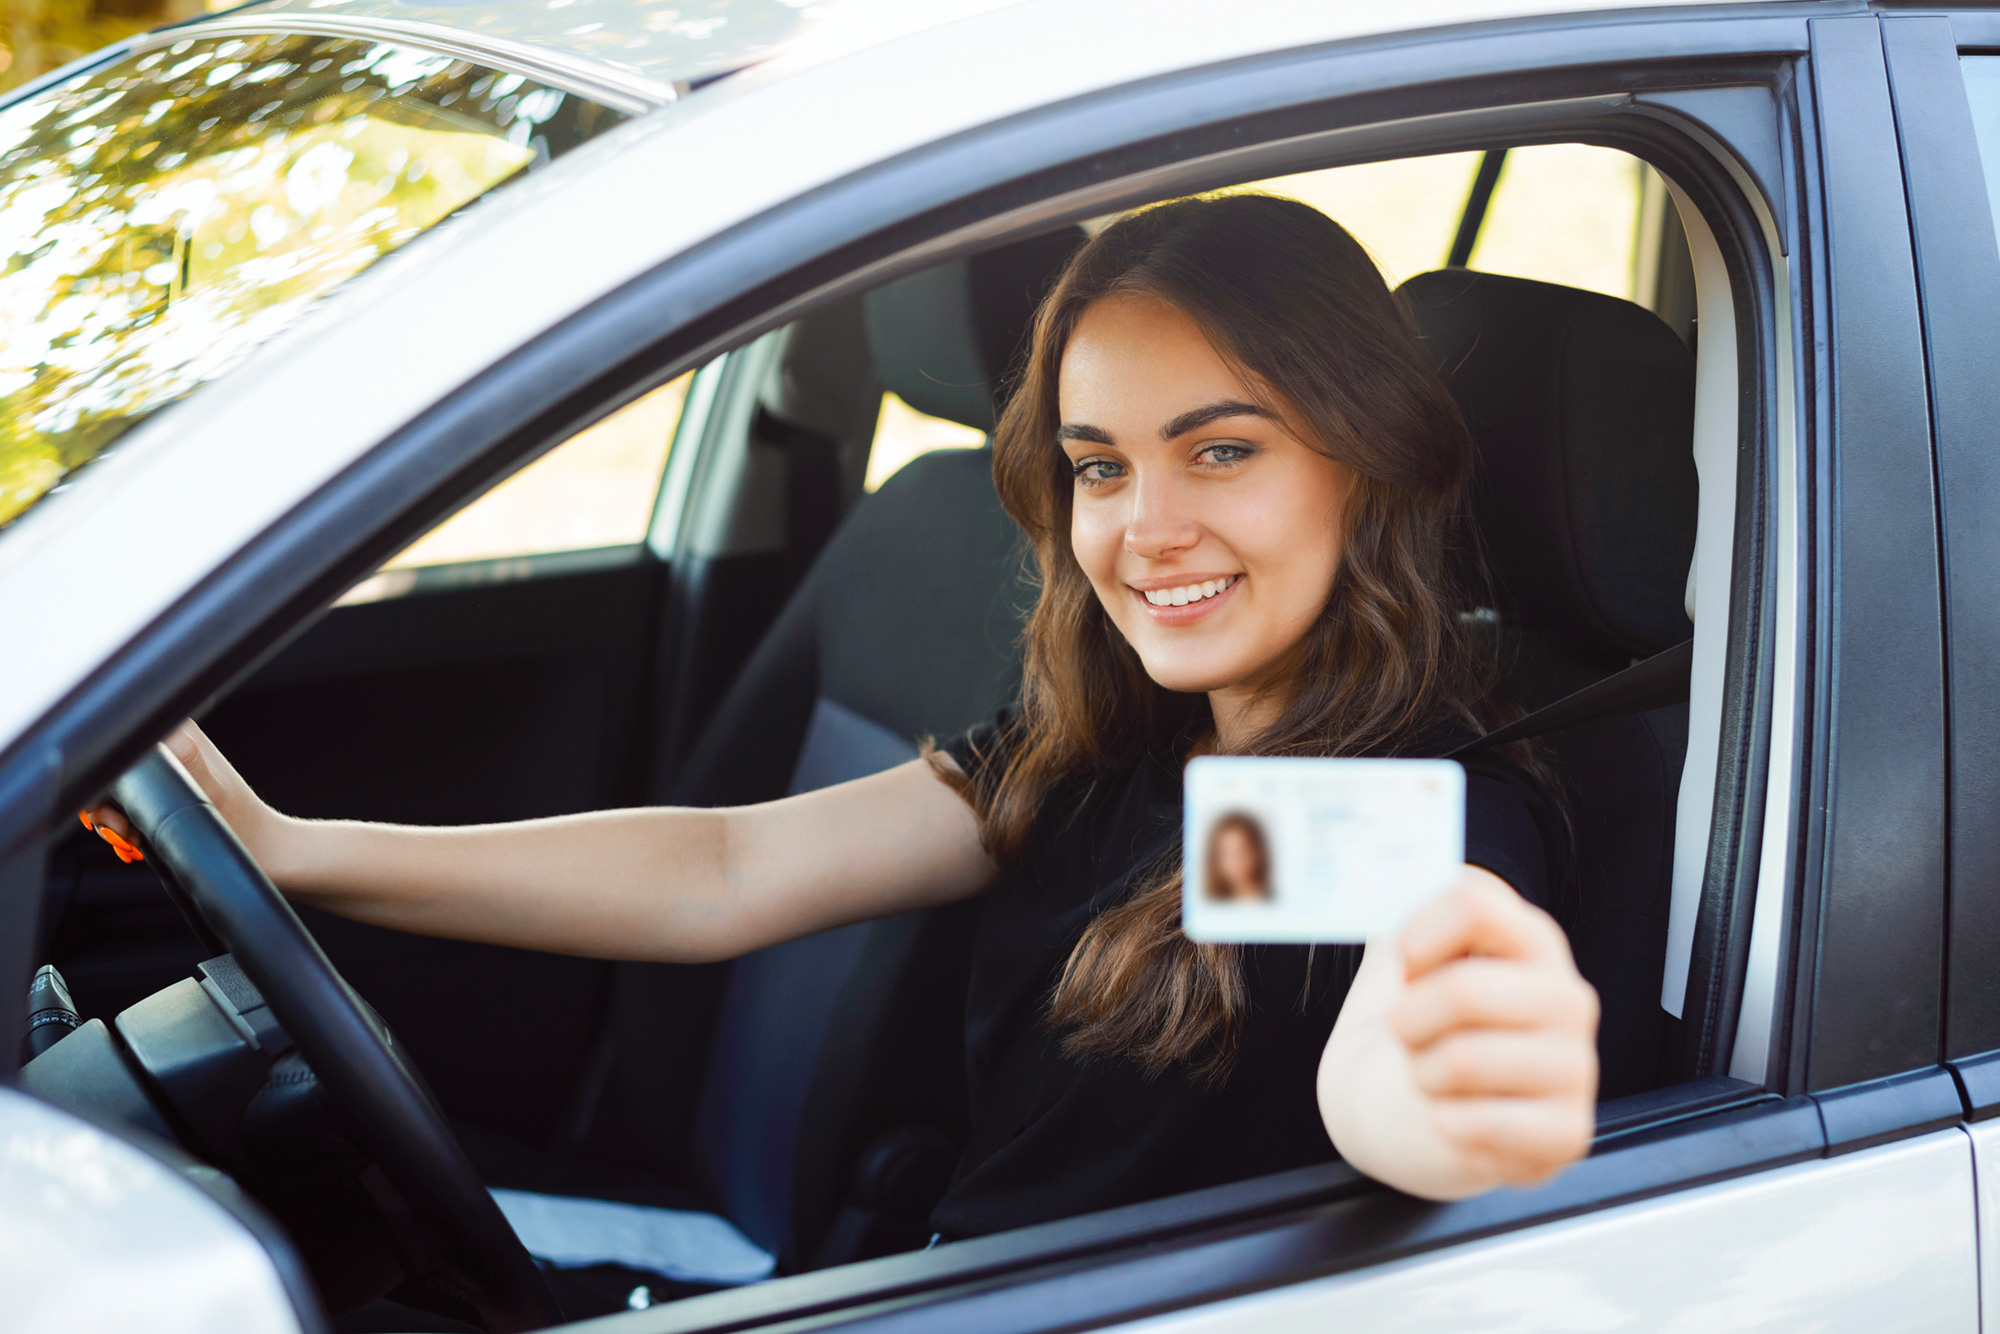 A lady showing her Driving License from car